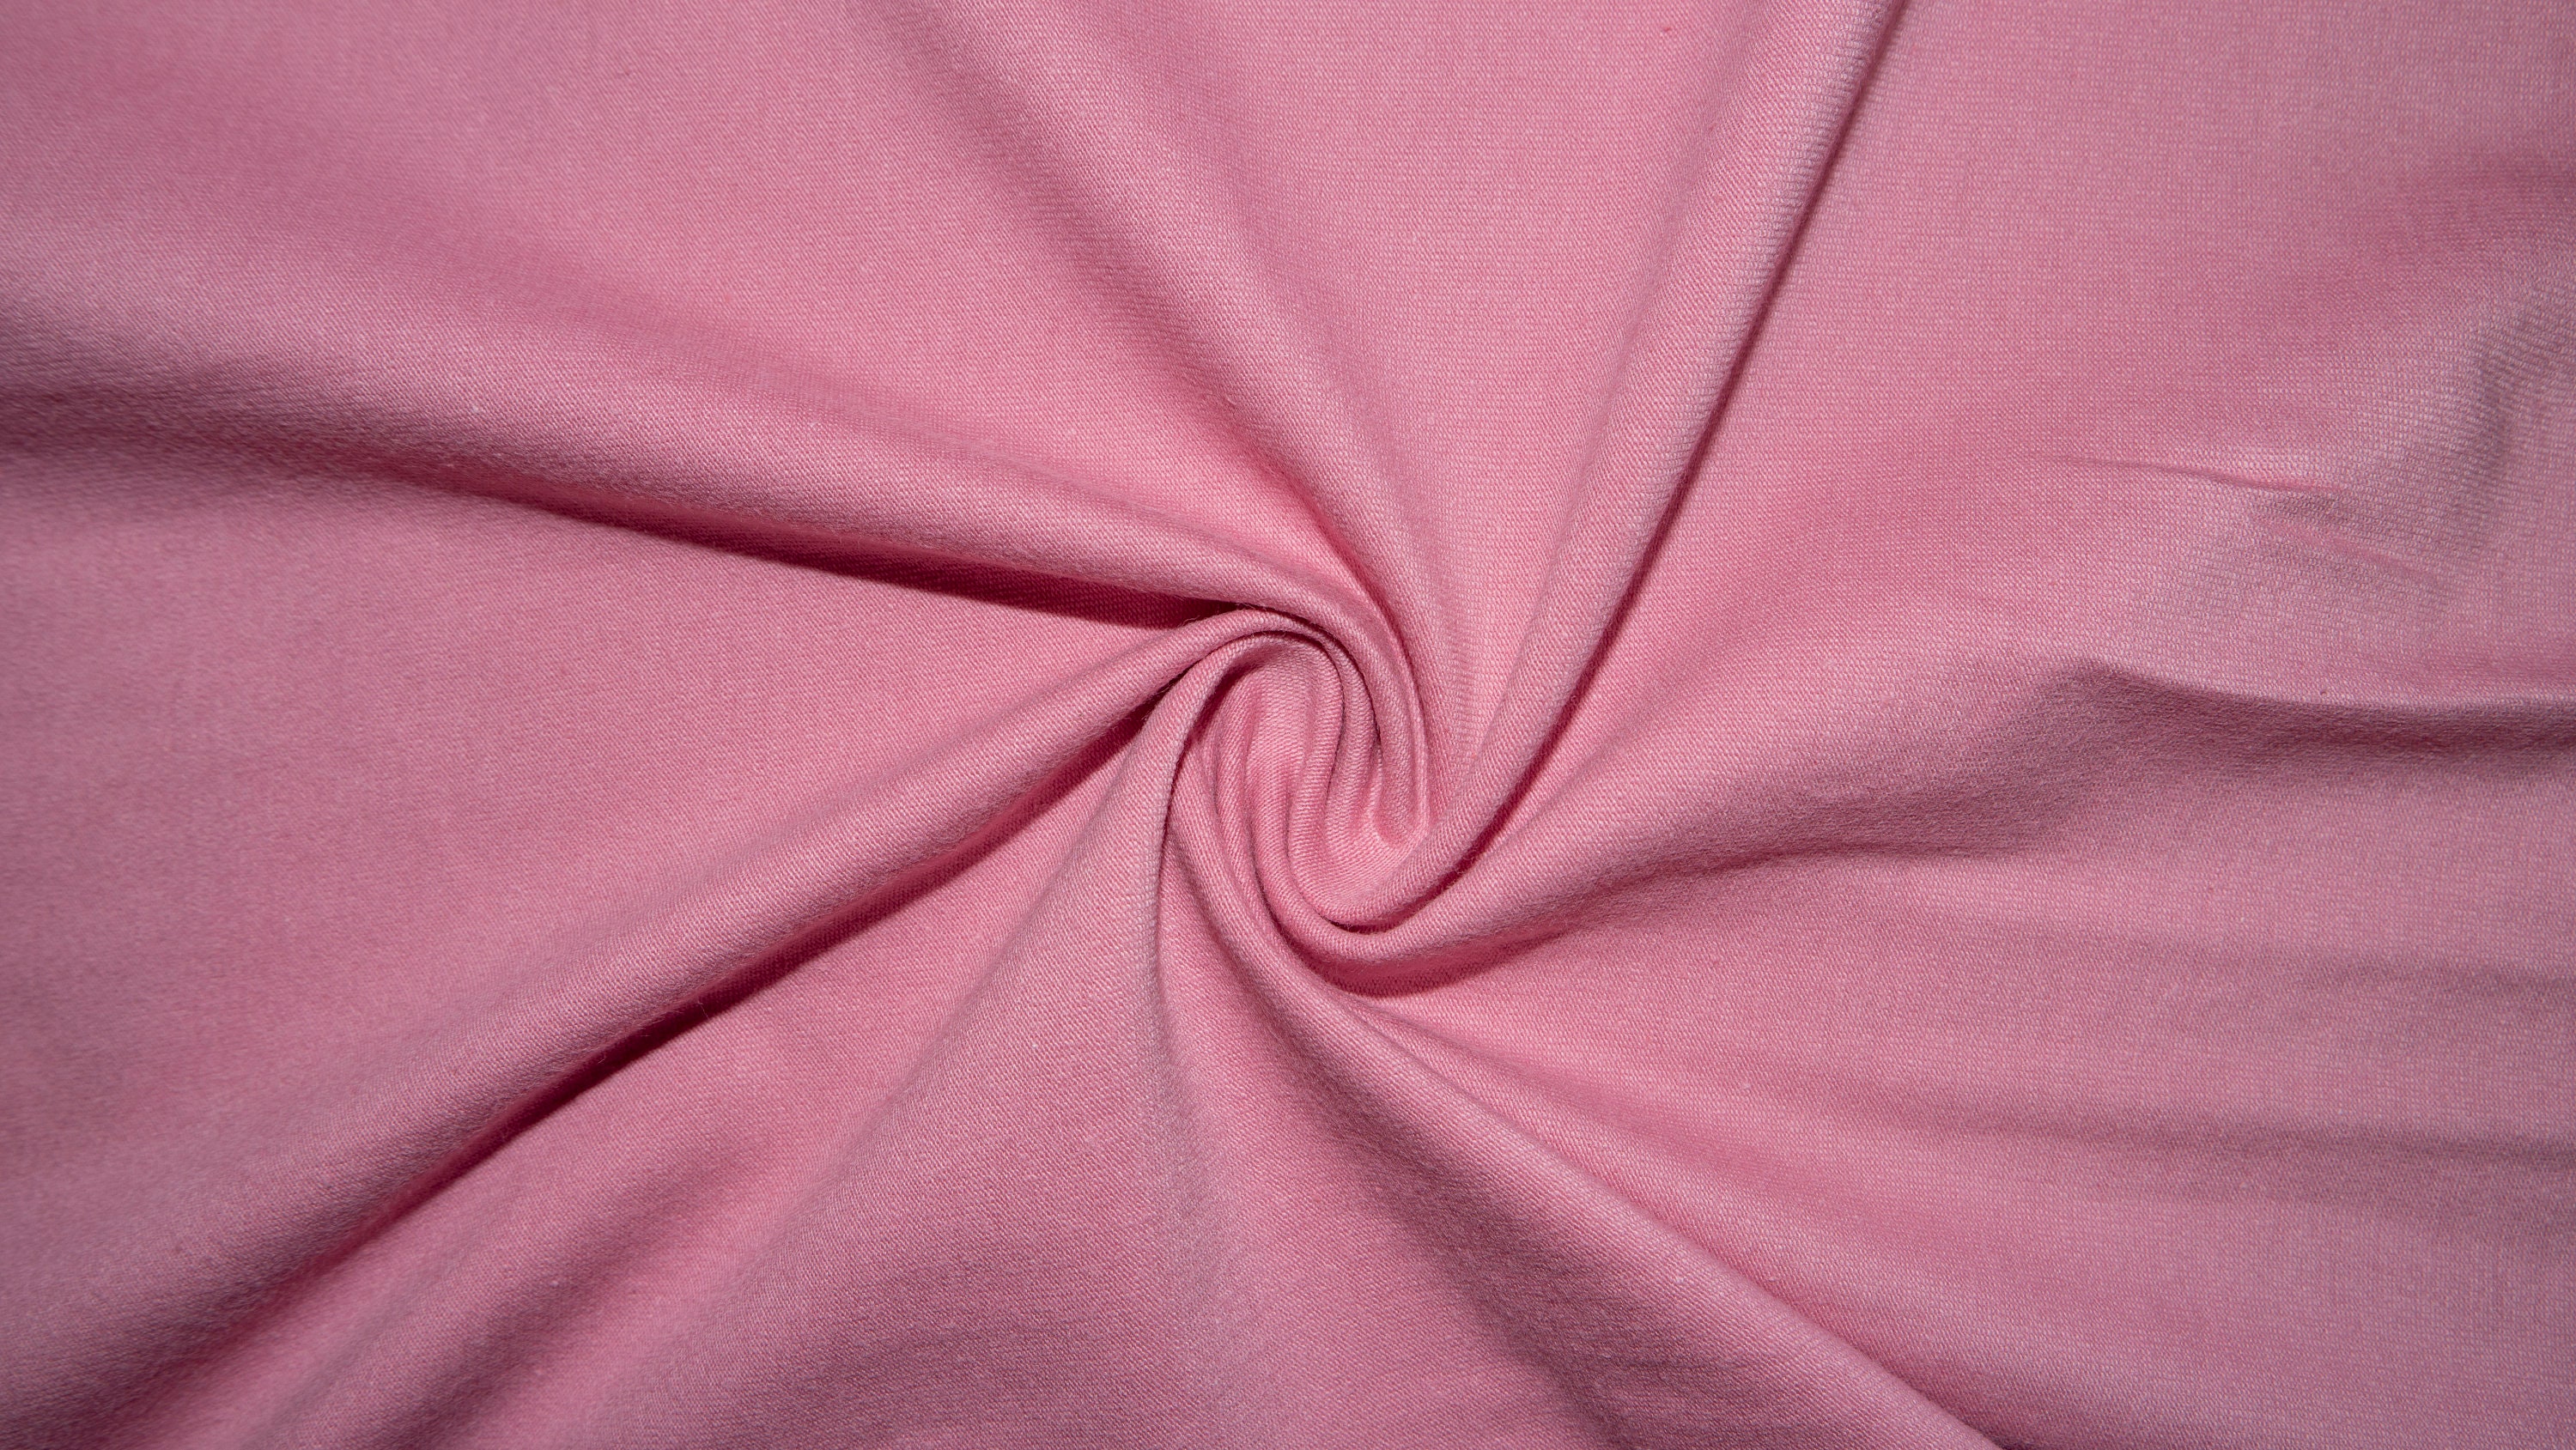 1M*1.2M-Spandex Cotton Lycra Solid fabric,stretch fabric,7 colors